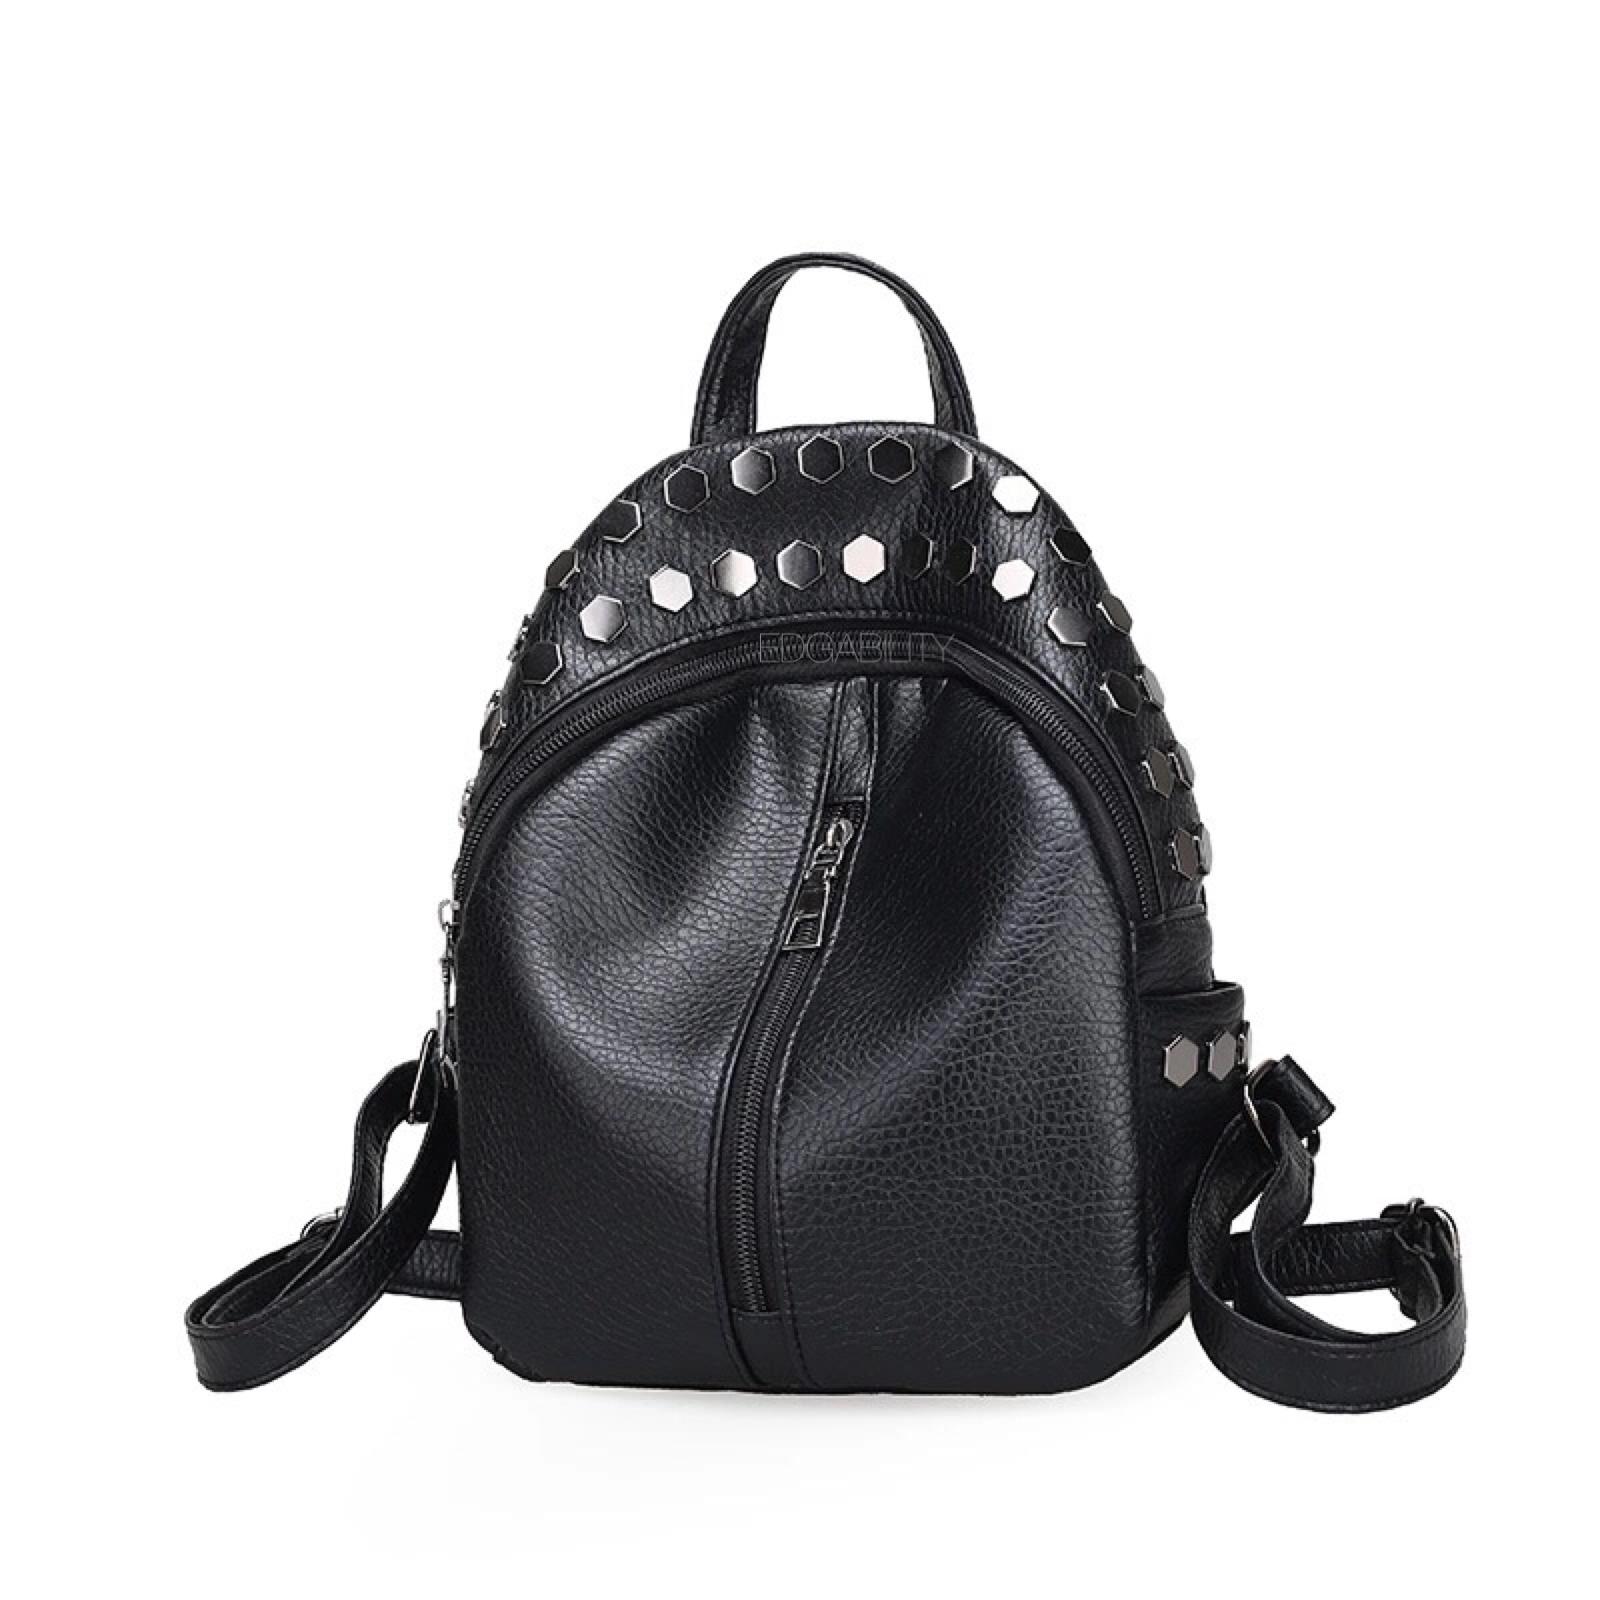 Messenger Bag Outdoor Chain Black Studded Purse Women's Mobile Phone Casual  | eBay